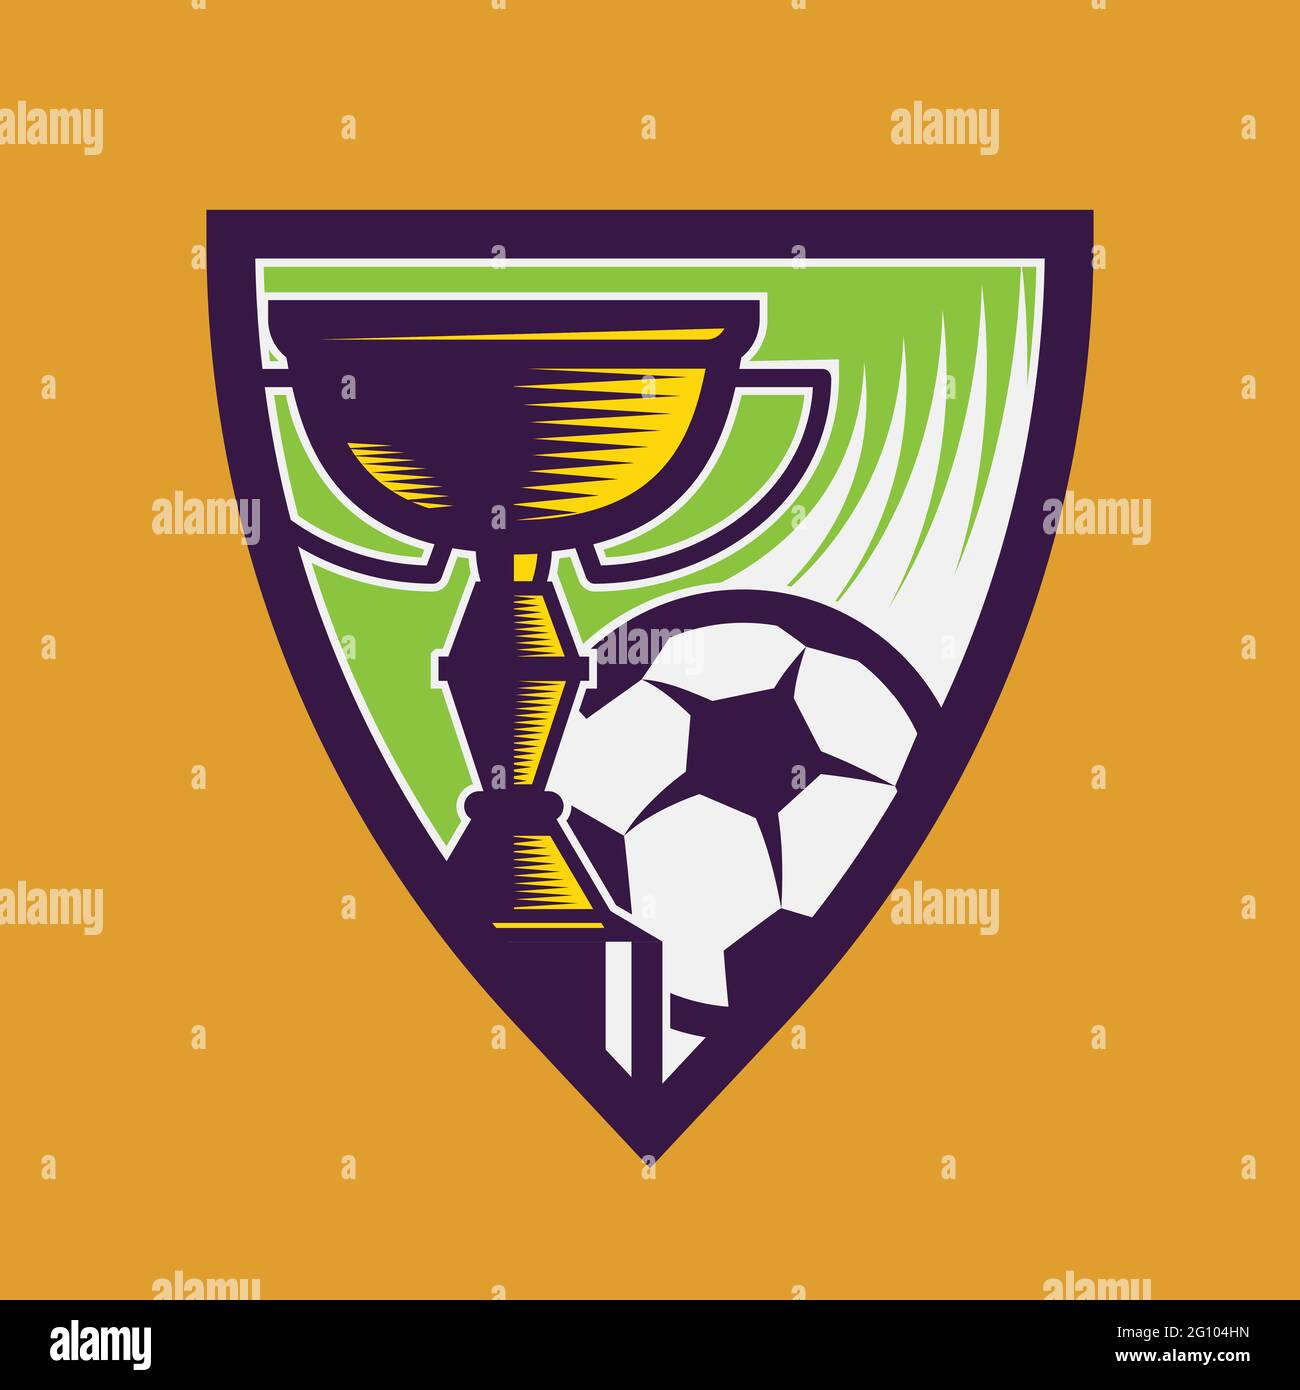 Football cup with ball. Concept art of football in cartoon style. Stock Vector